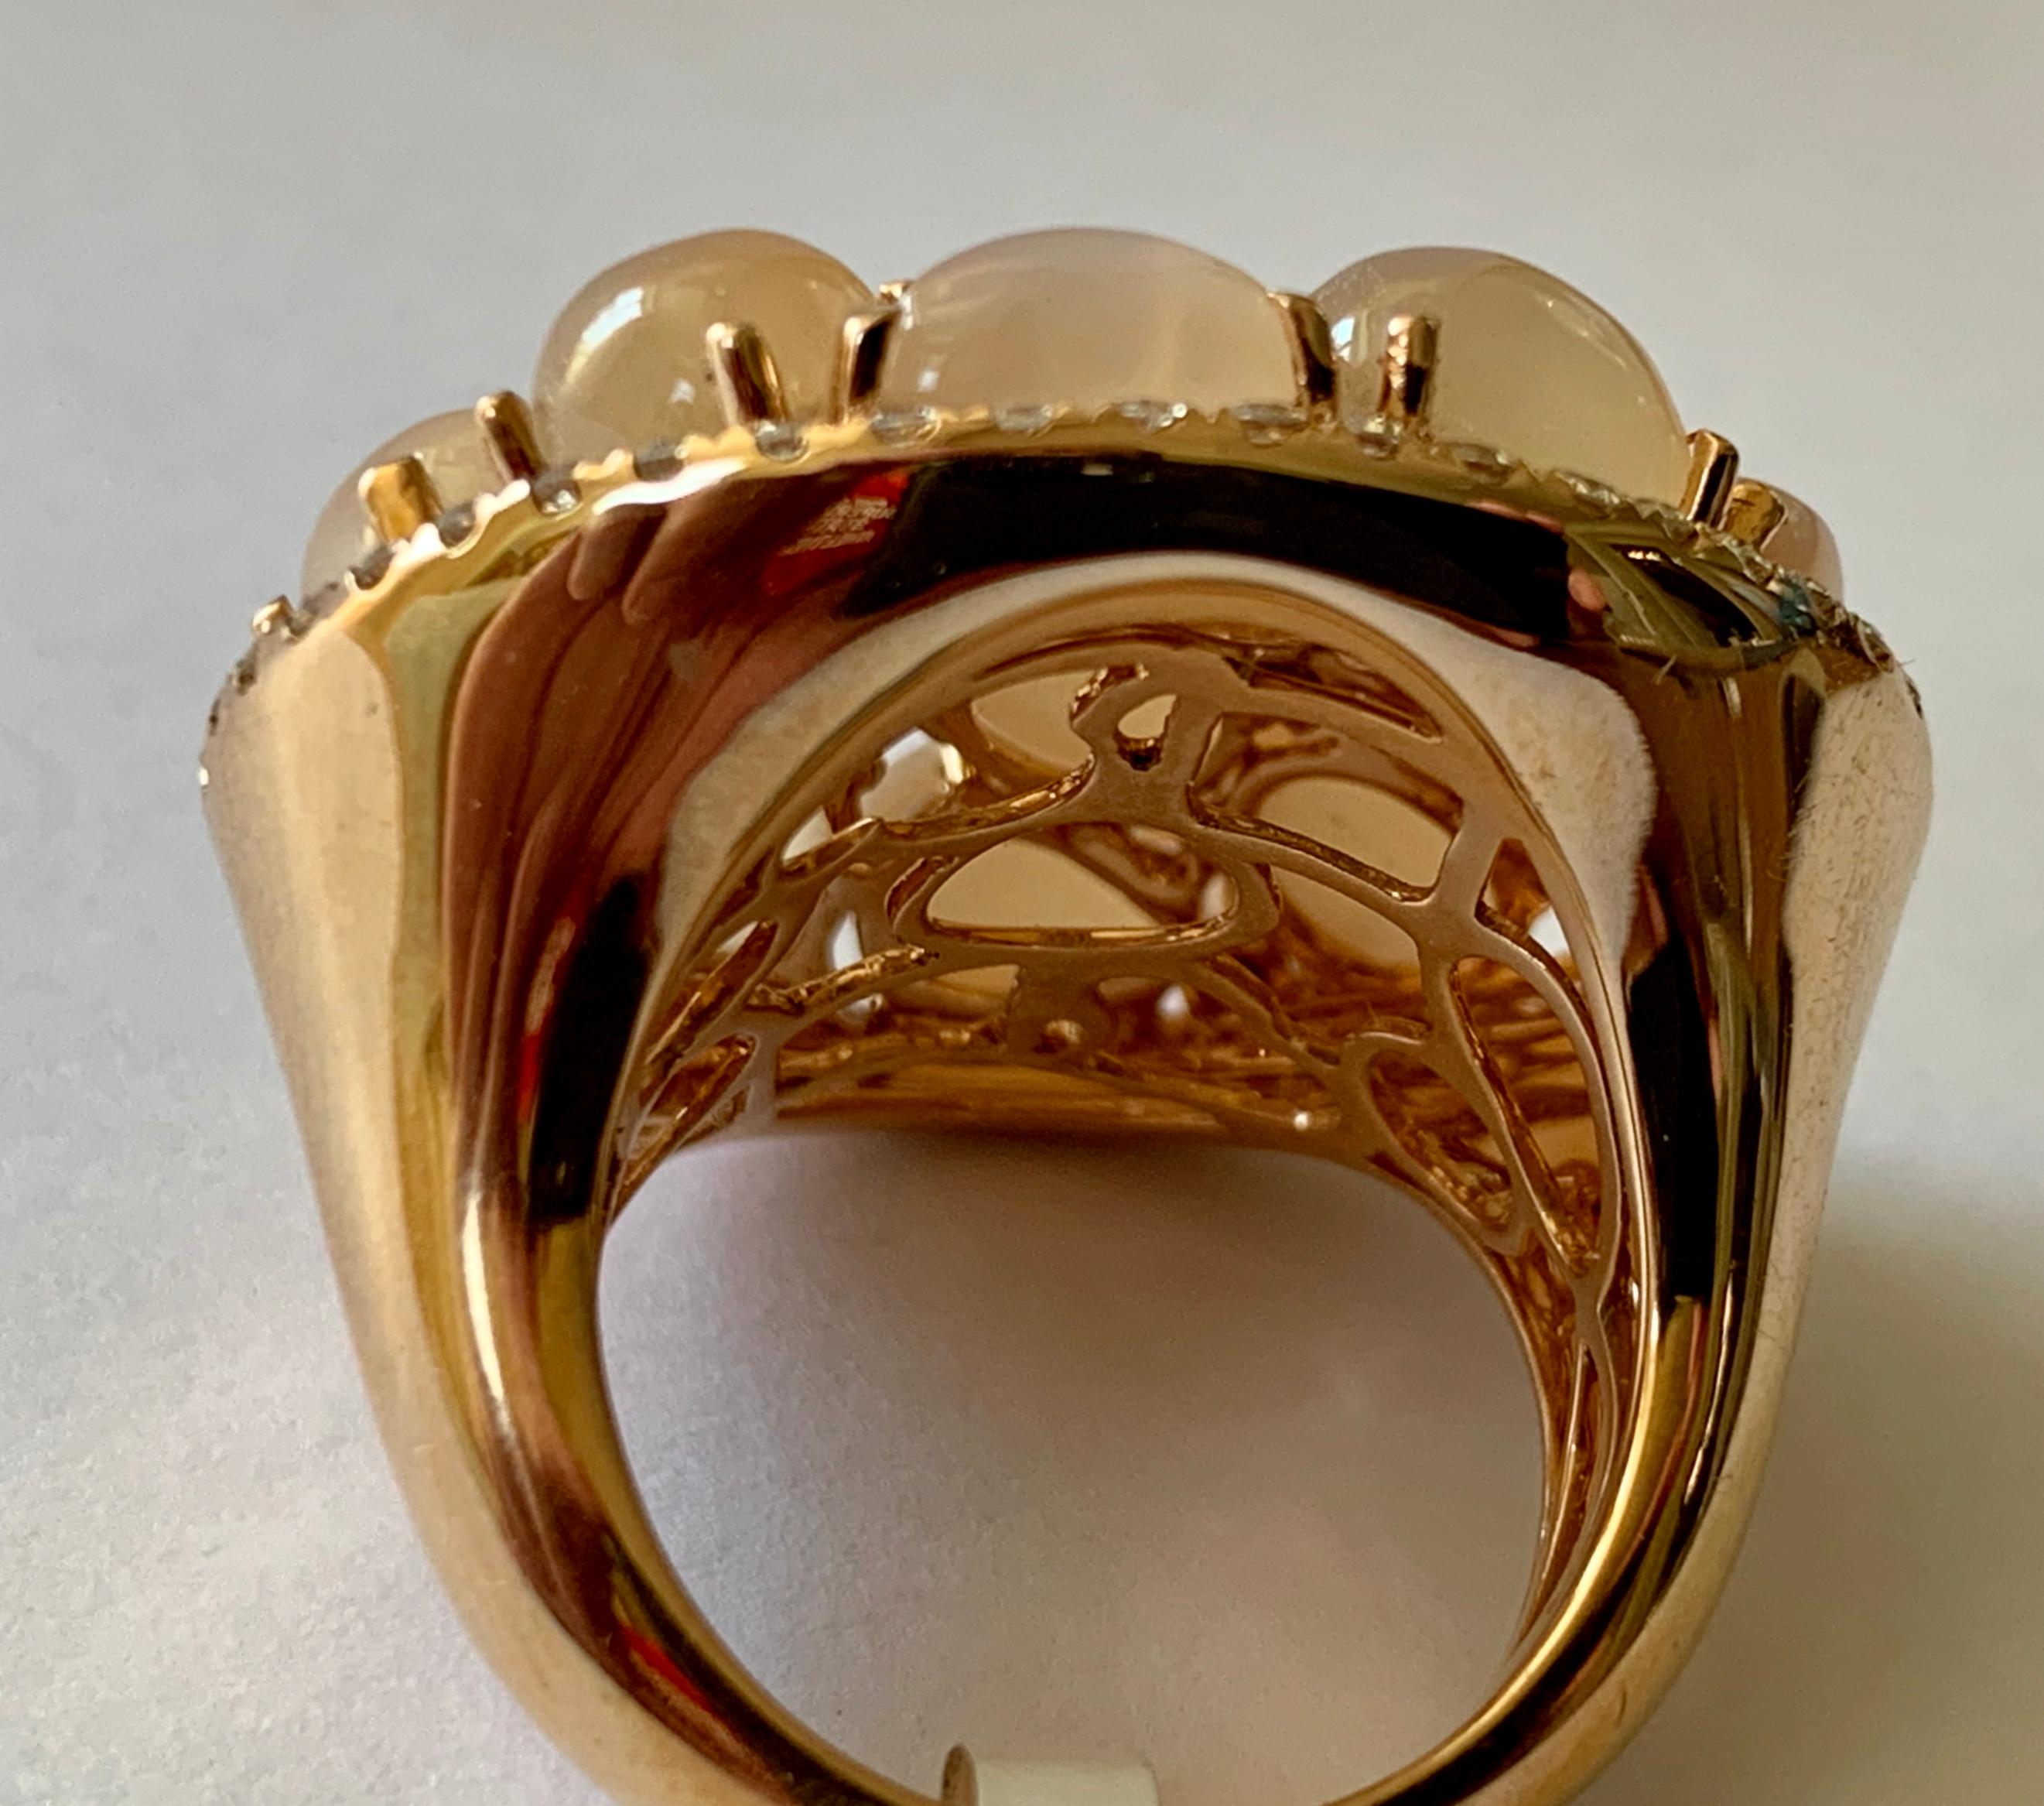 Extravagant 18 Karat Rose Gold Cocktail Ring with Moonstones and Diamonds For Sale 2